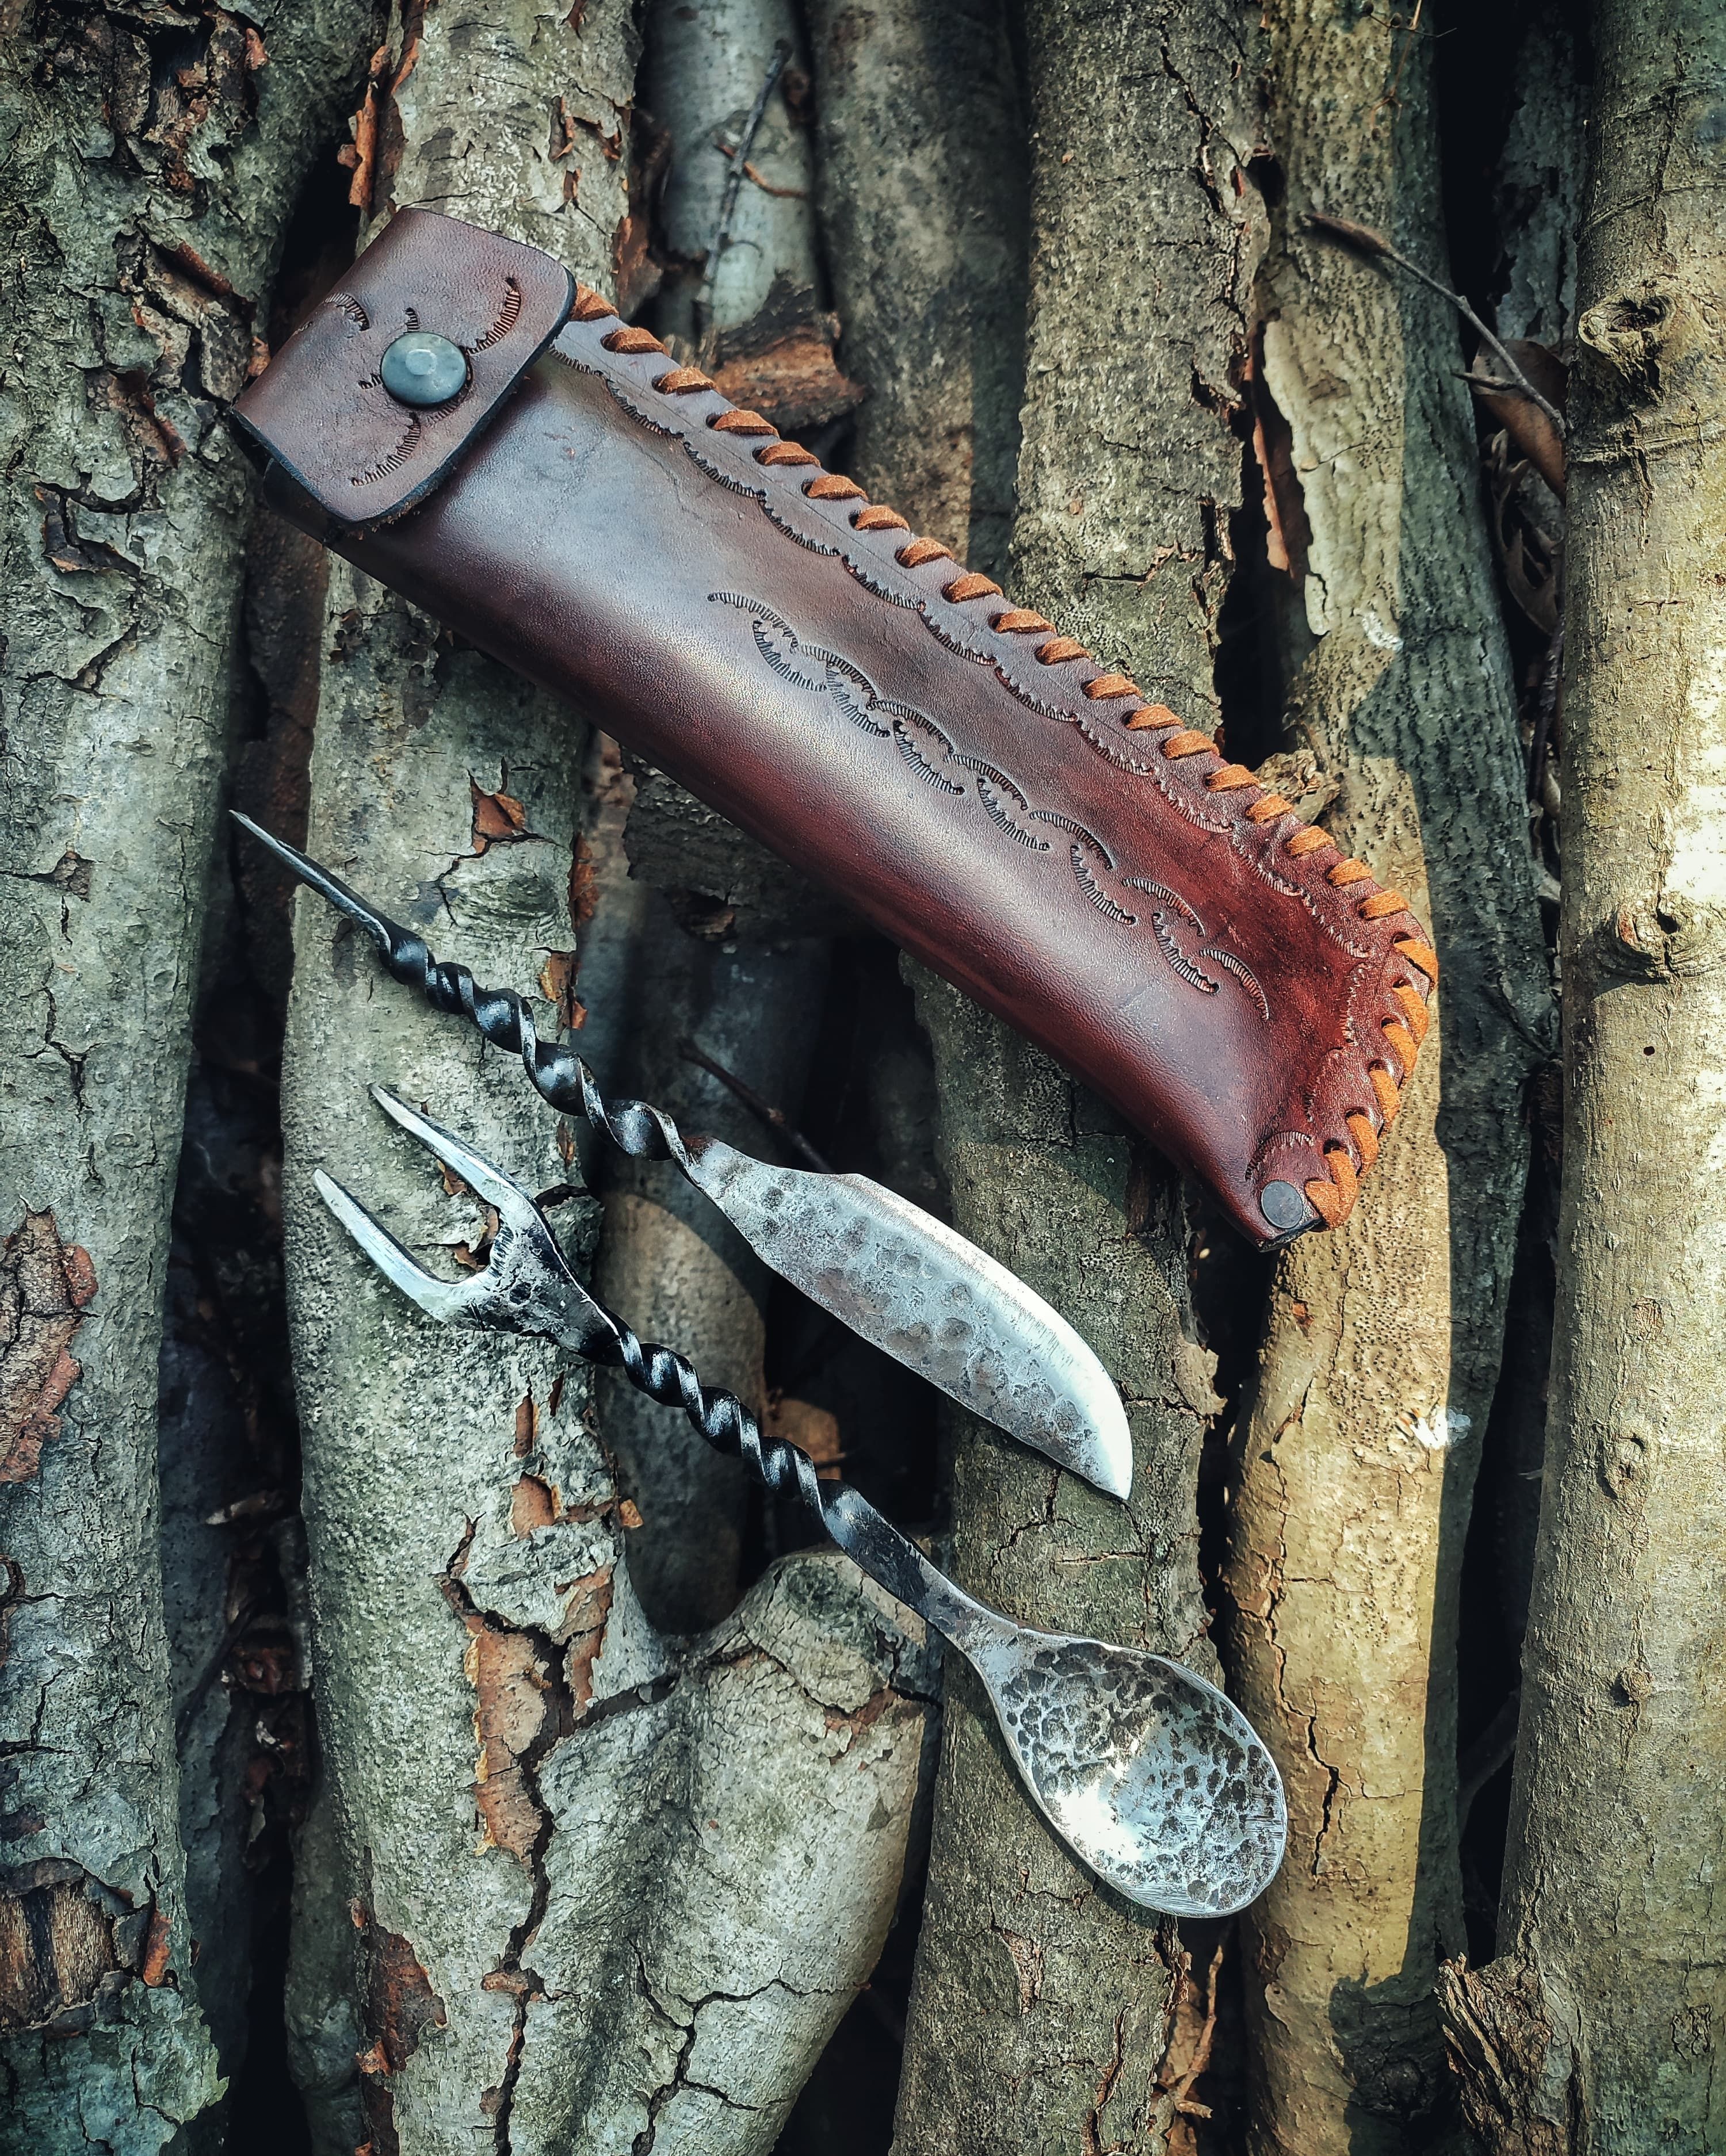 Handcrafted Primitive Style Knife, Fork, and Spoon Sets - Unique Designs Inspired by Nature